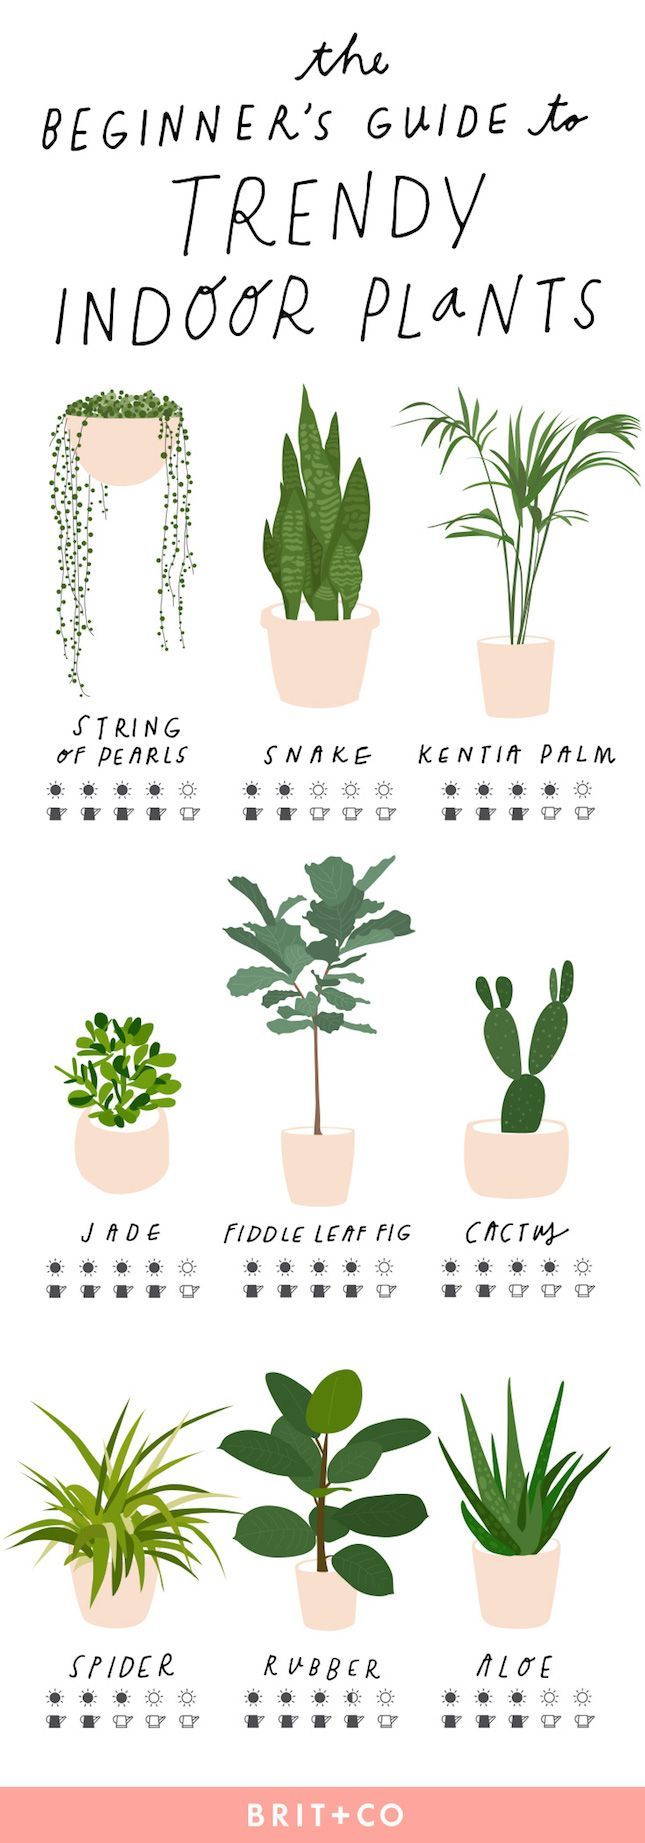 The Beginners Guide to Trendy Indoor Plants via Brit   Co